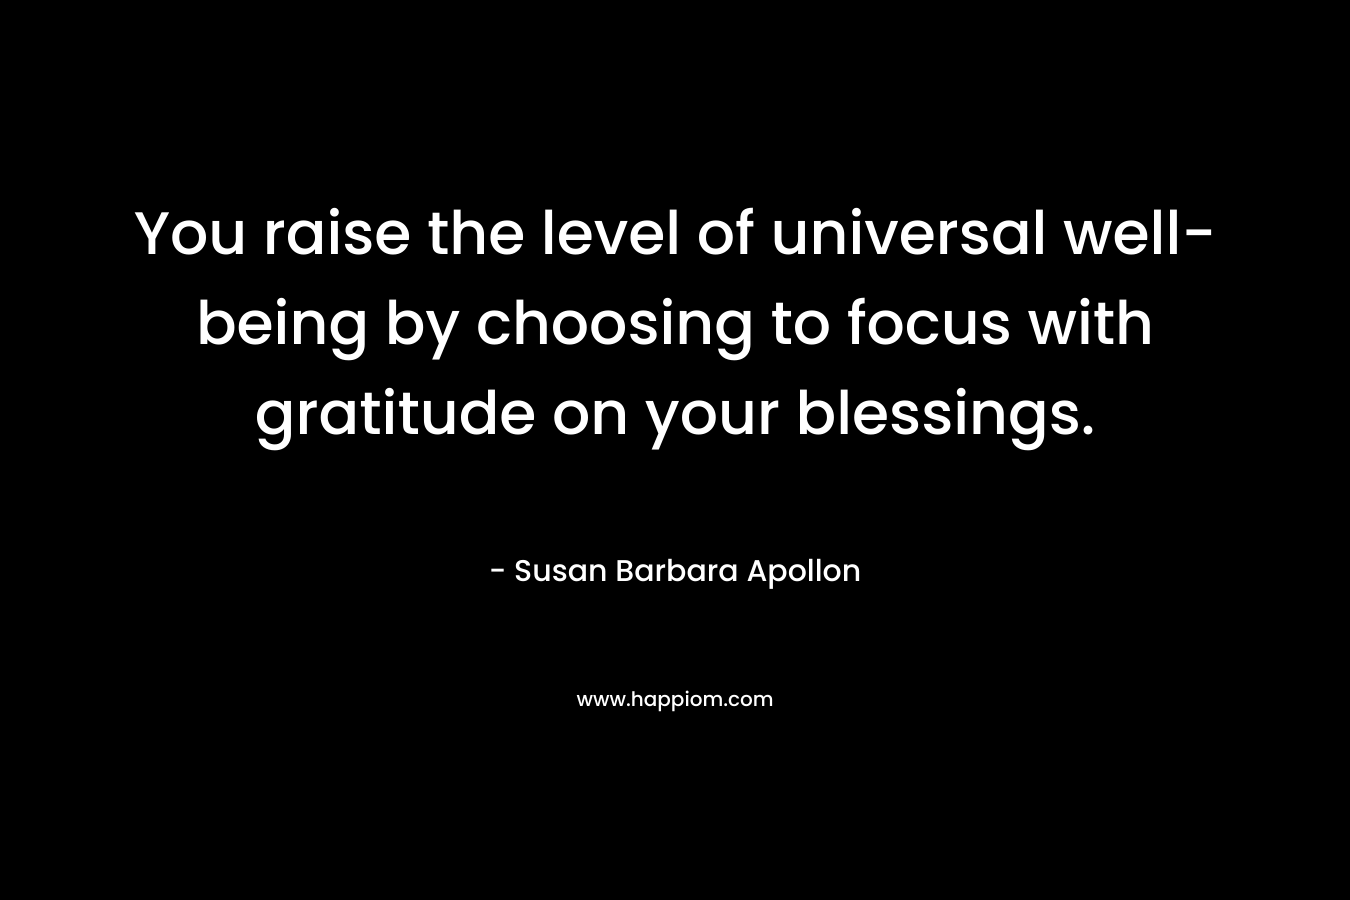 You raise the level of universal well-being by choosing to focus with gratitude on your blessings. – Susan Barbara Apollon